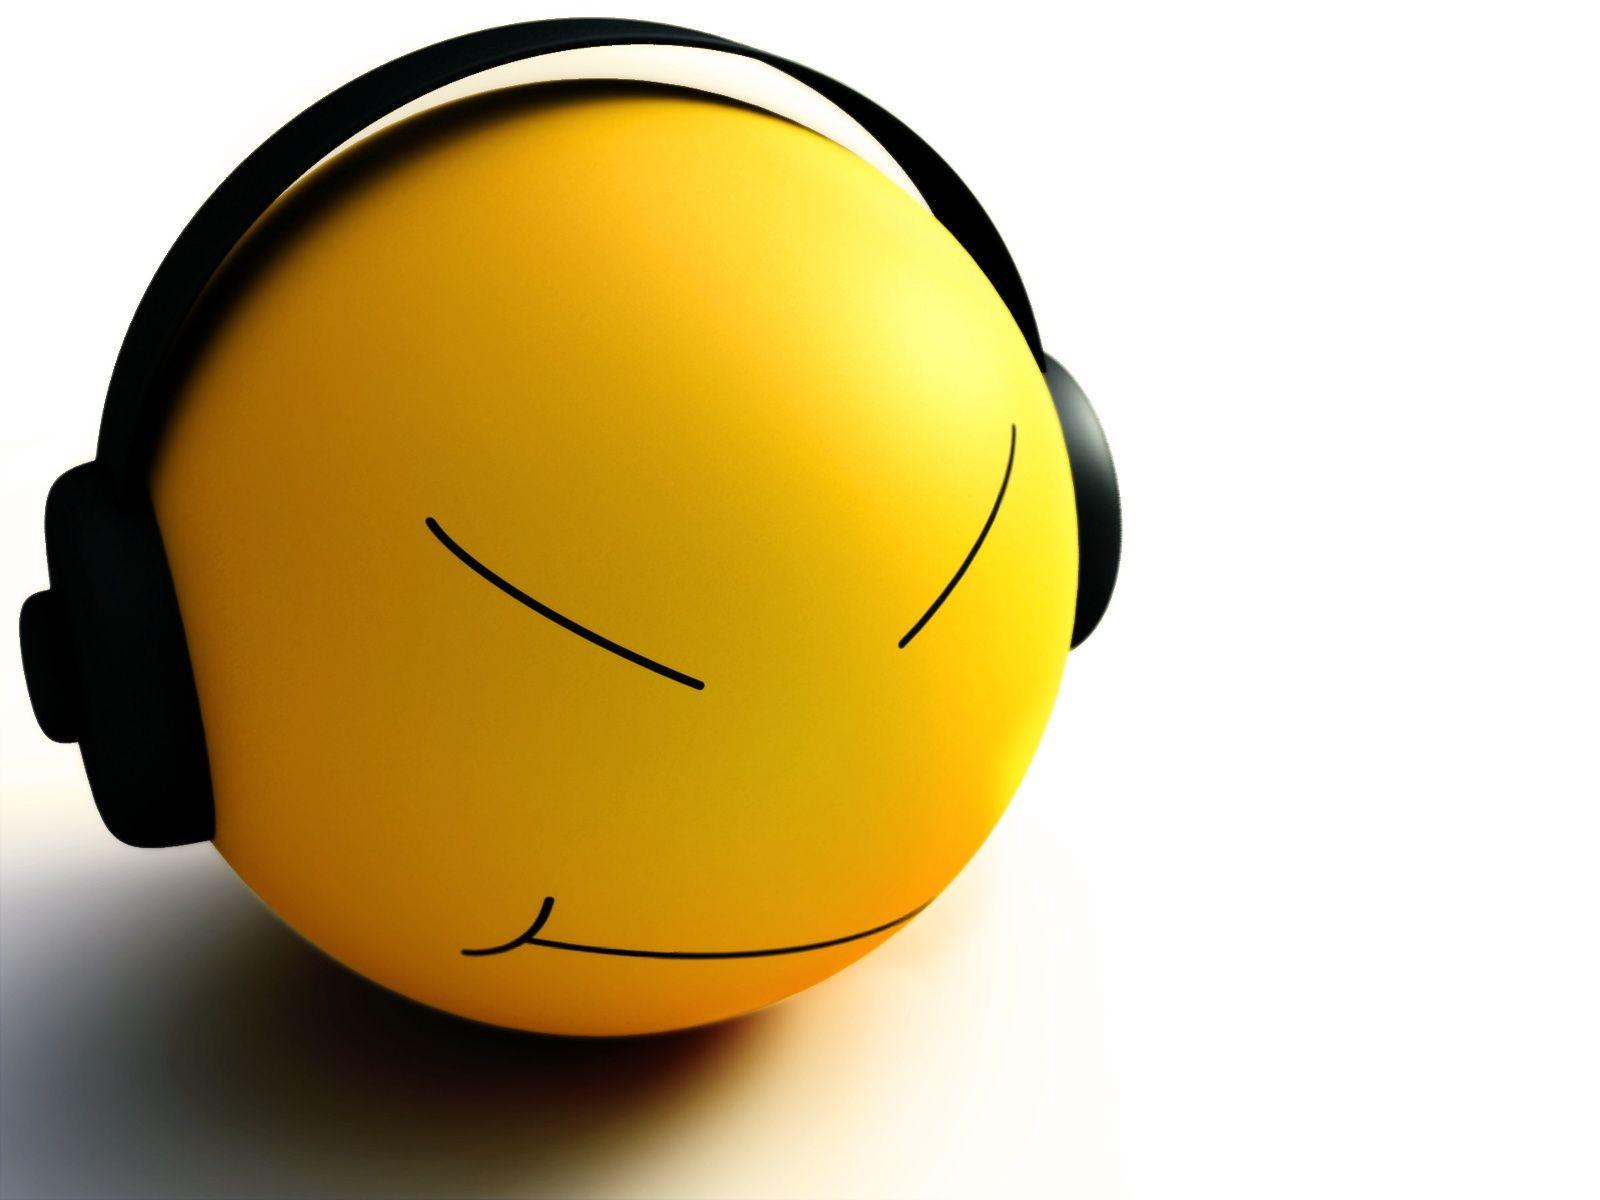 3D wallpaper smiley wallpaper for free download about 392